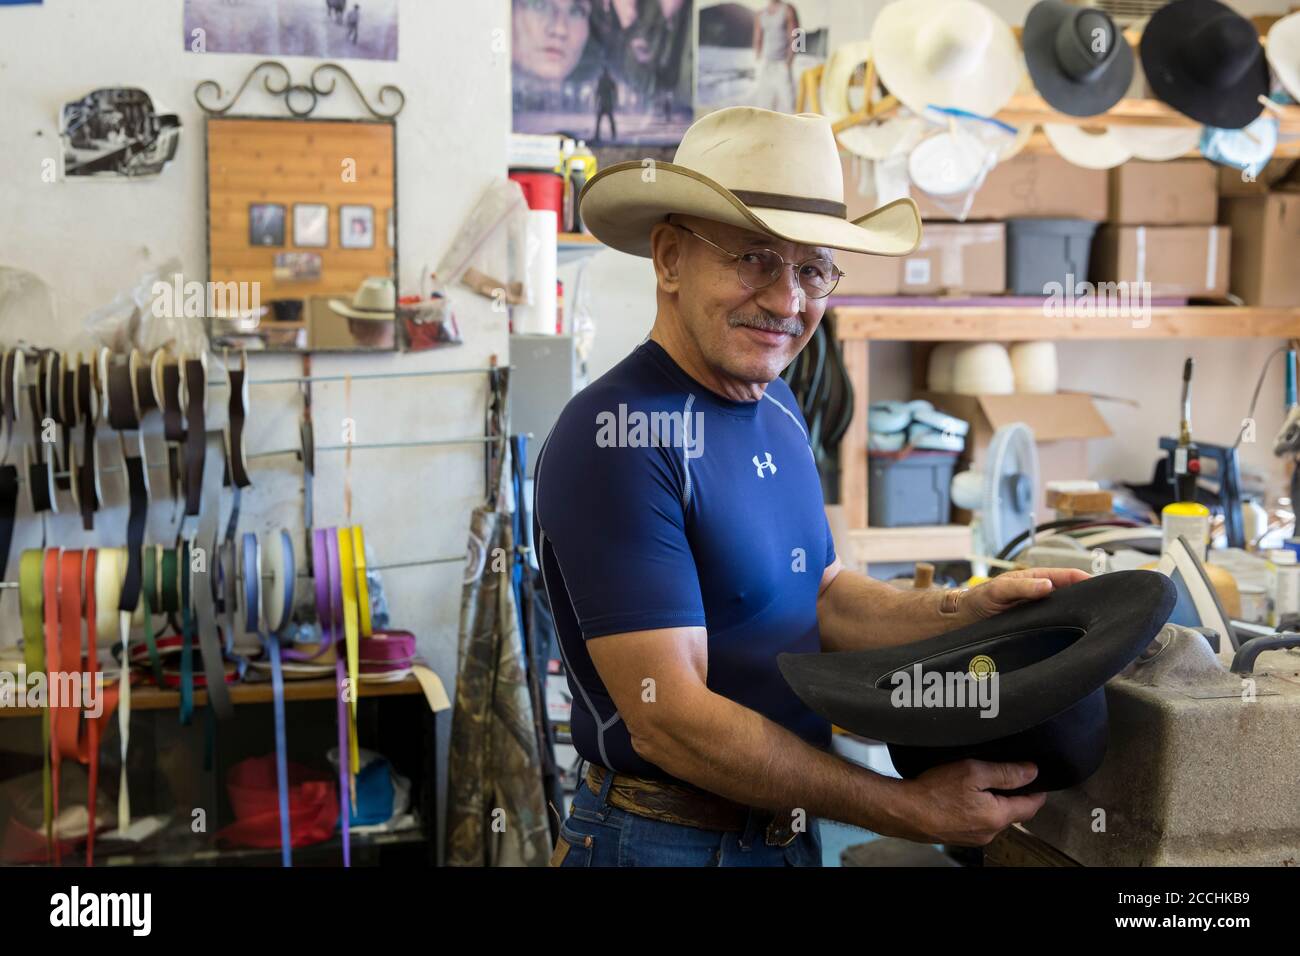 Jimmy 'The Hat Man' Harrison shapes a hat in his workshop in the Double H Custom Hat Company in Darby, Montana on July, 31, 2020. Stock Photo